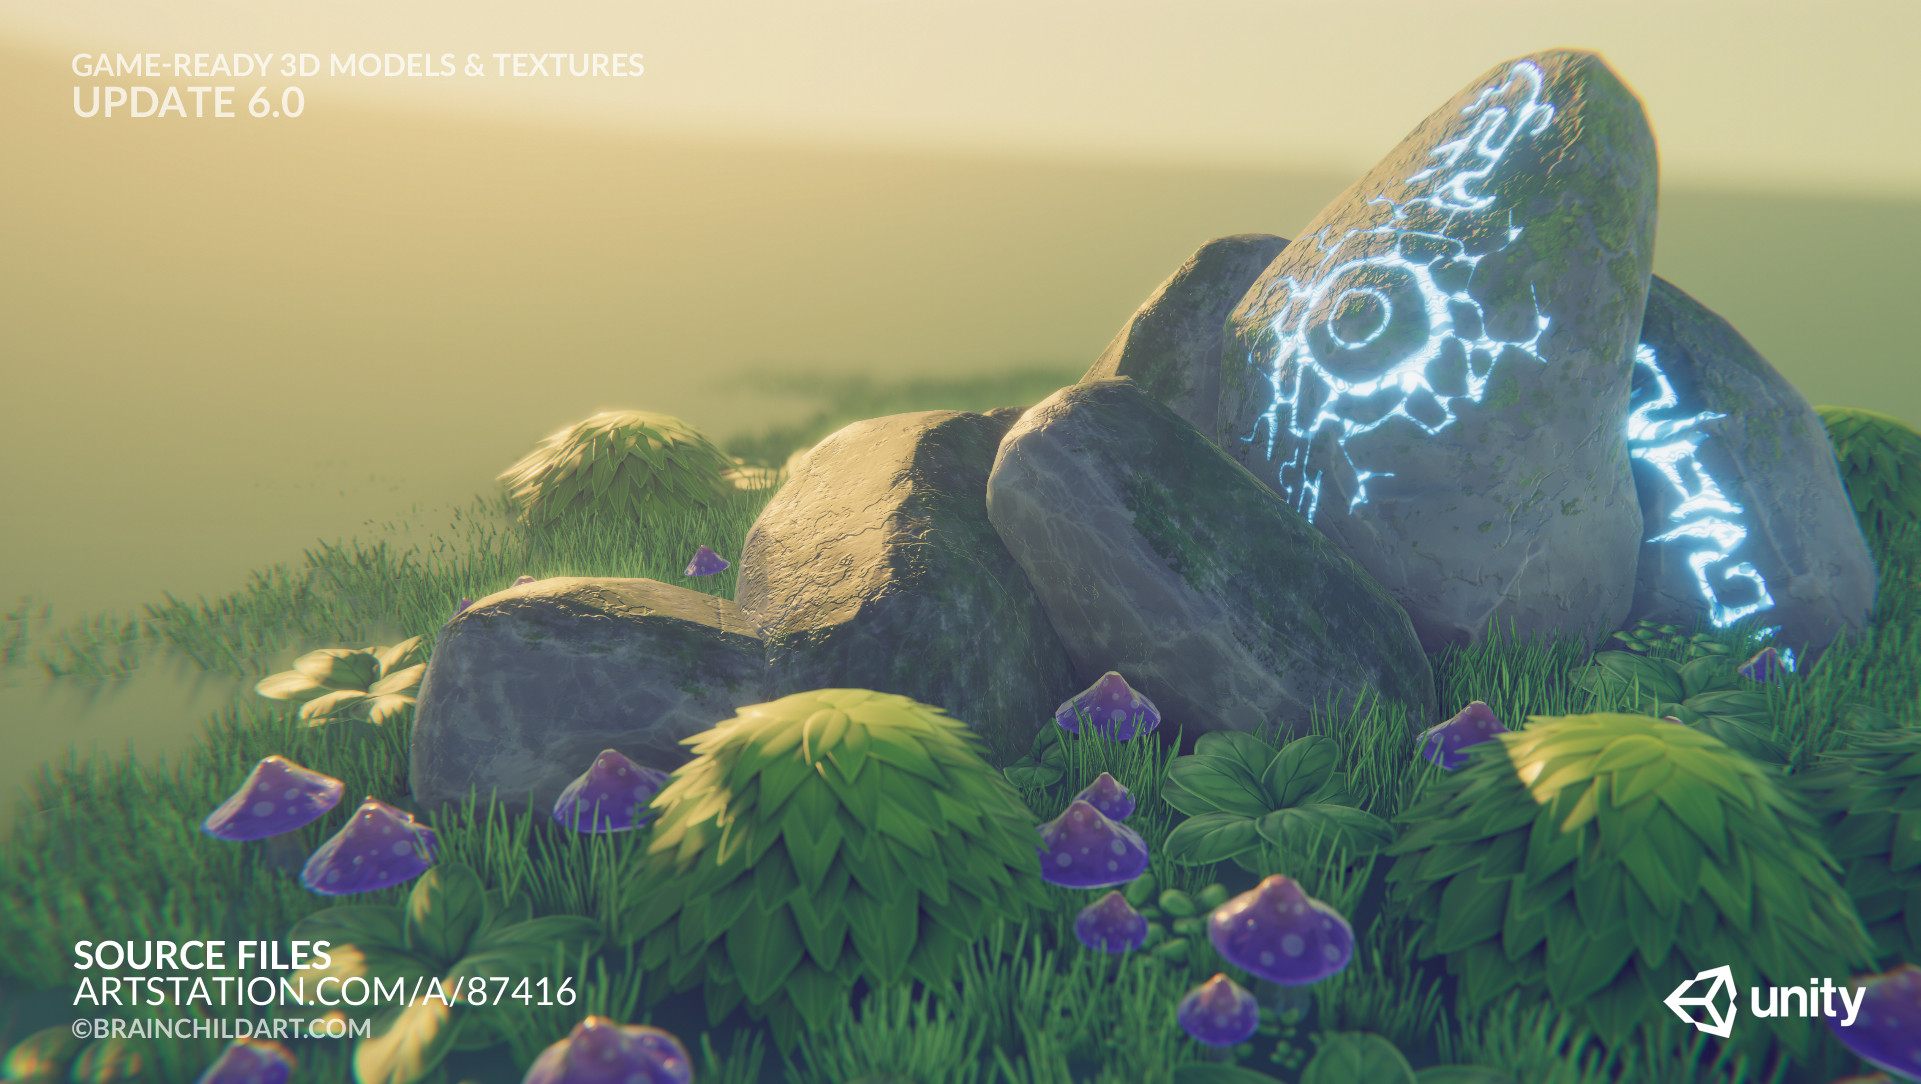 Source files
https://www.artstation.com/a/87416 (UPDATE 6.0) - Stylised Game-ready FOLIAGE / GRASS / ROCKS | Unity 2019 HDRP